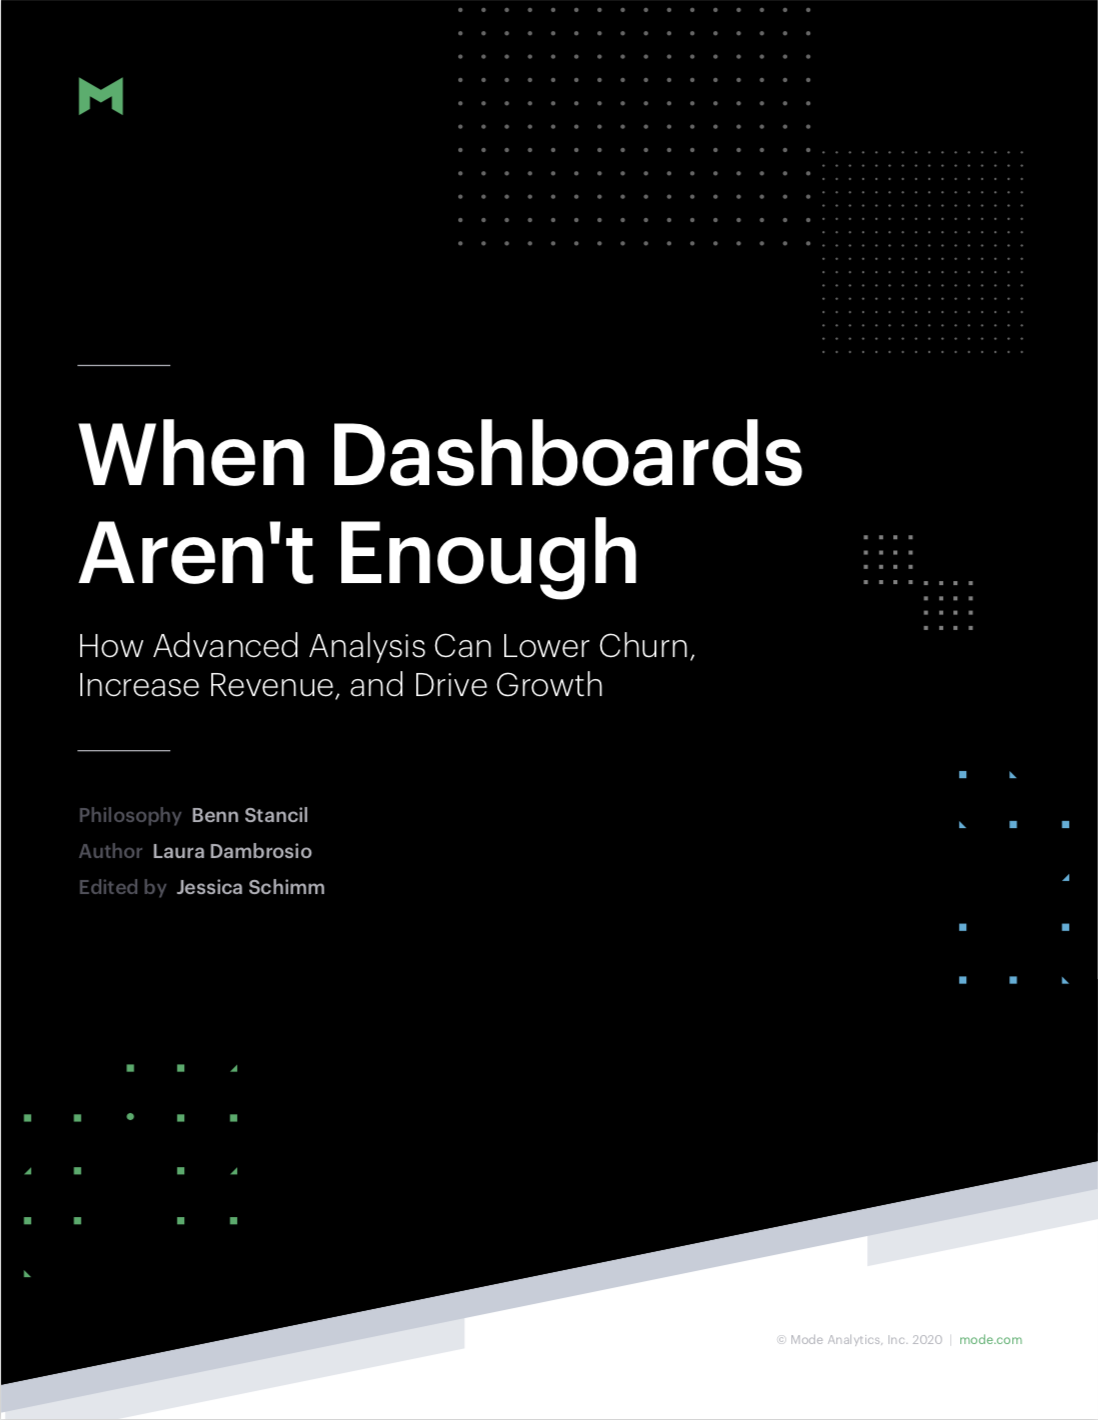 When Dashboards Aren't Enough cover image